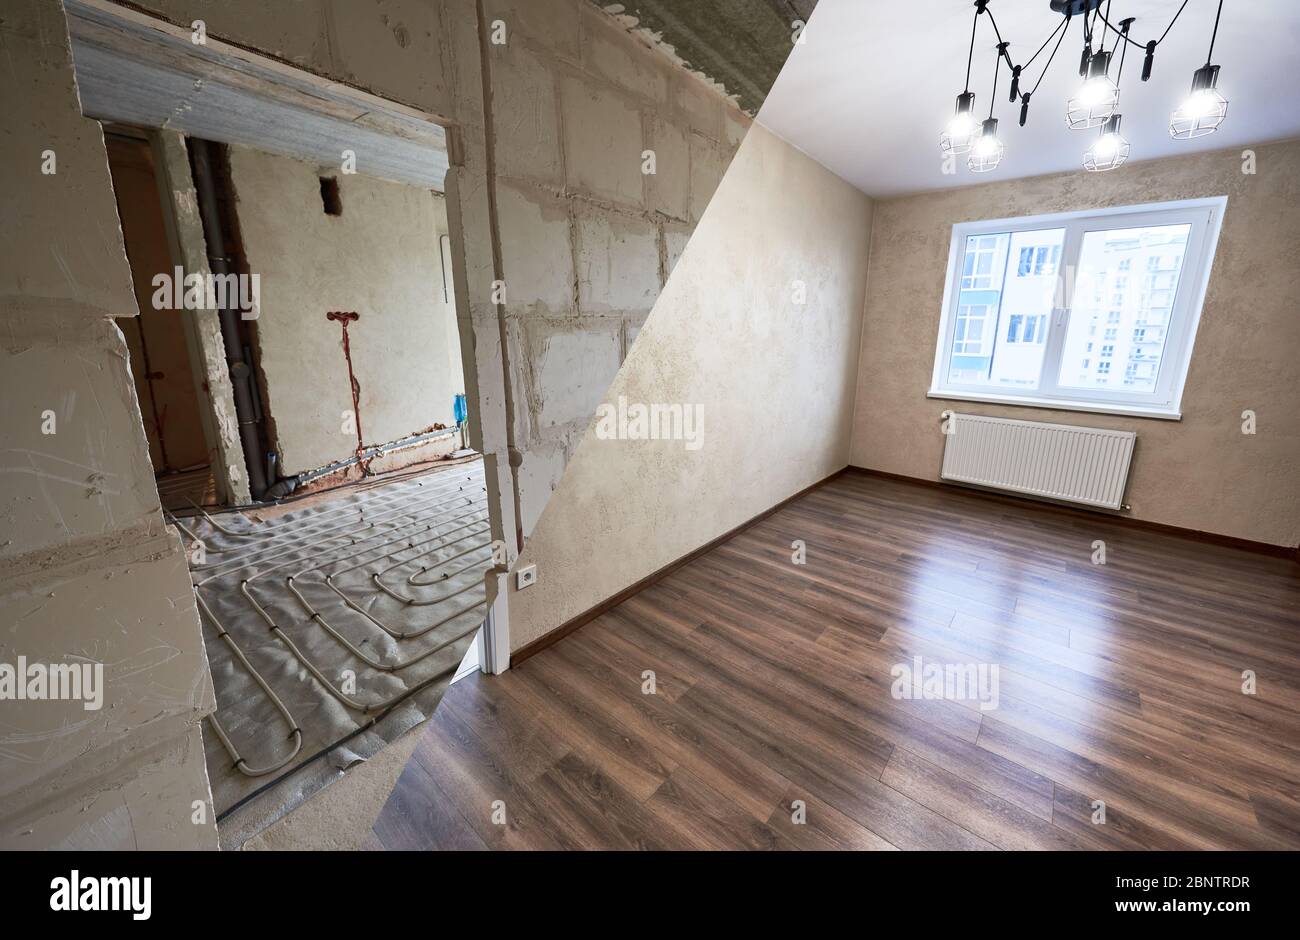 Comparison of room in apartment before and after renovation. Spacious light room with modern wood laminate and chandelier vs empty doorway with a view to another unfinished room. Construction concept Stock Photo